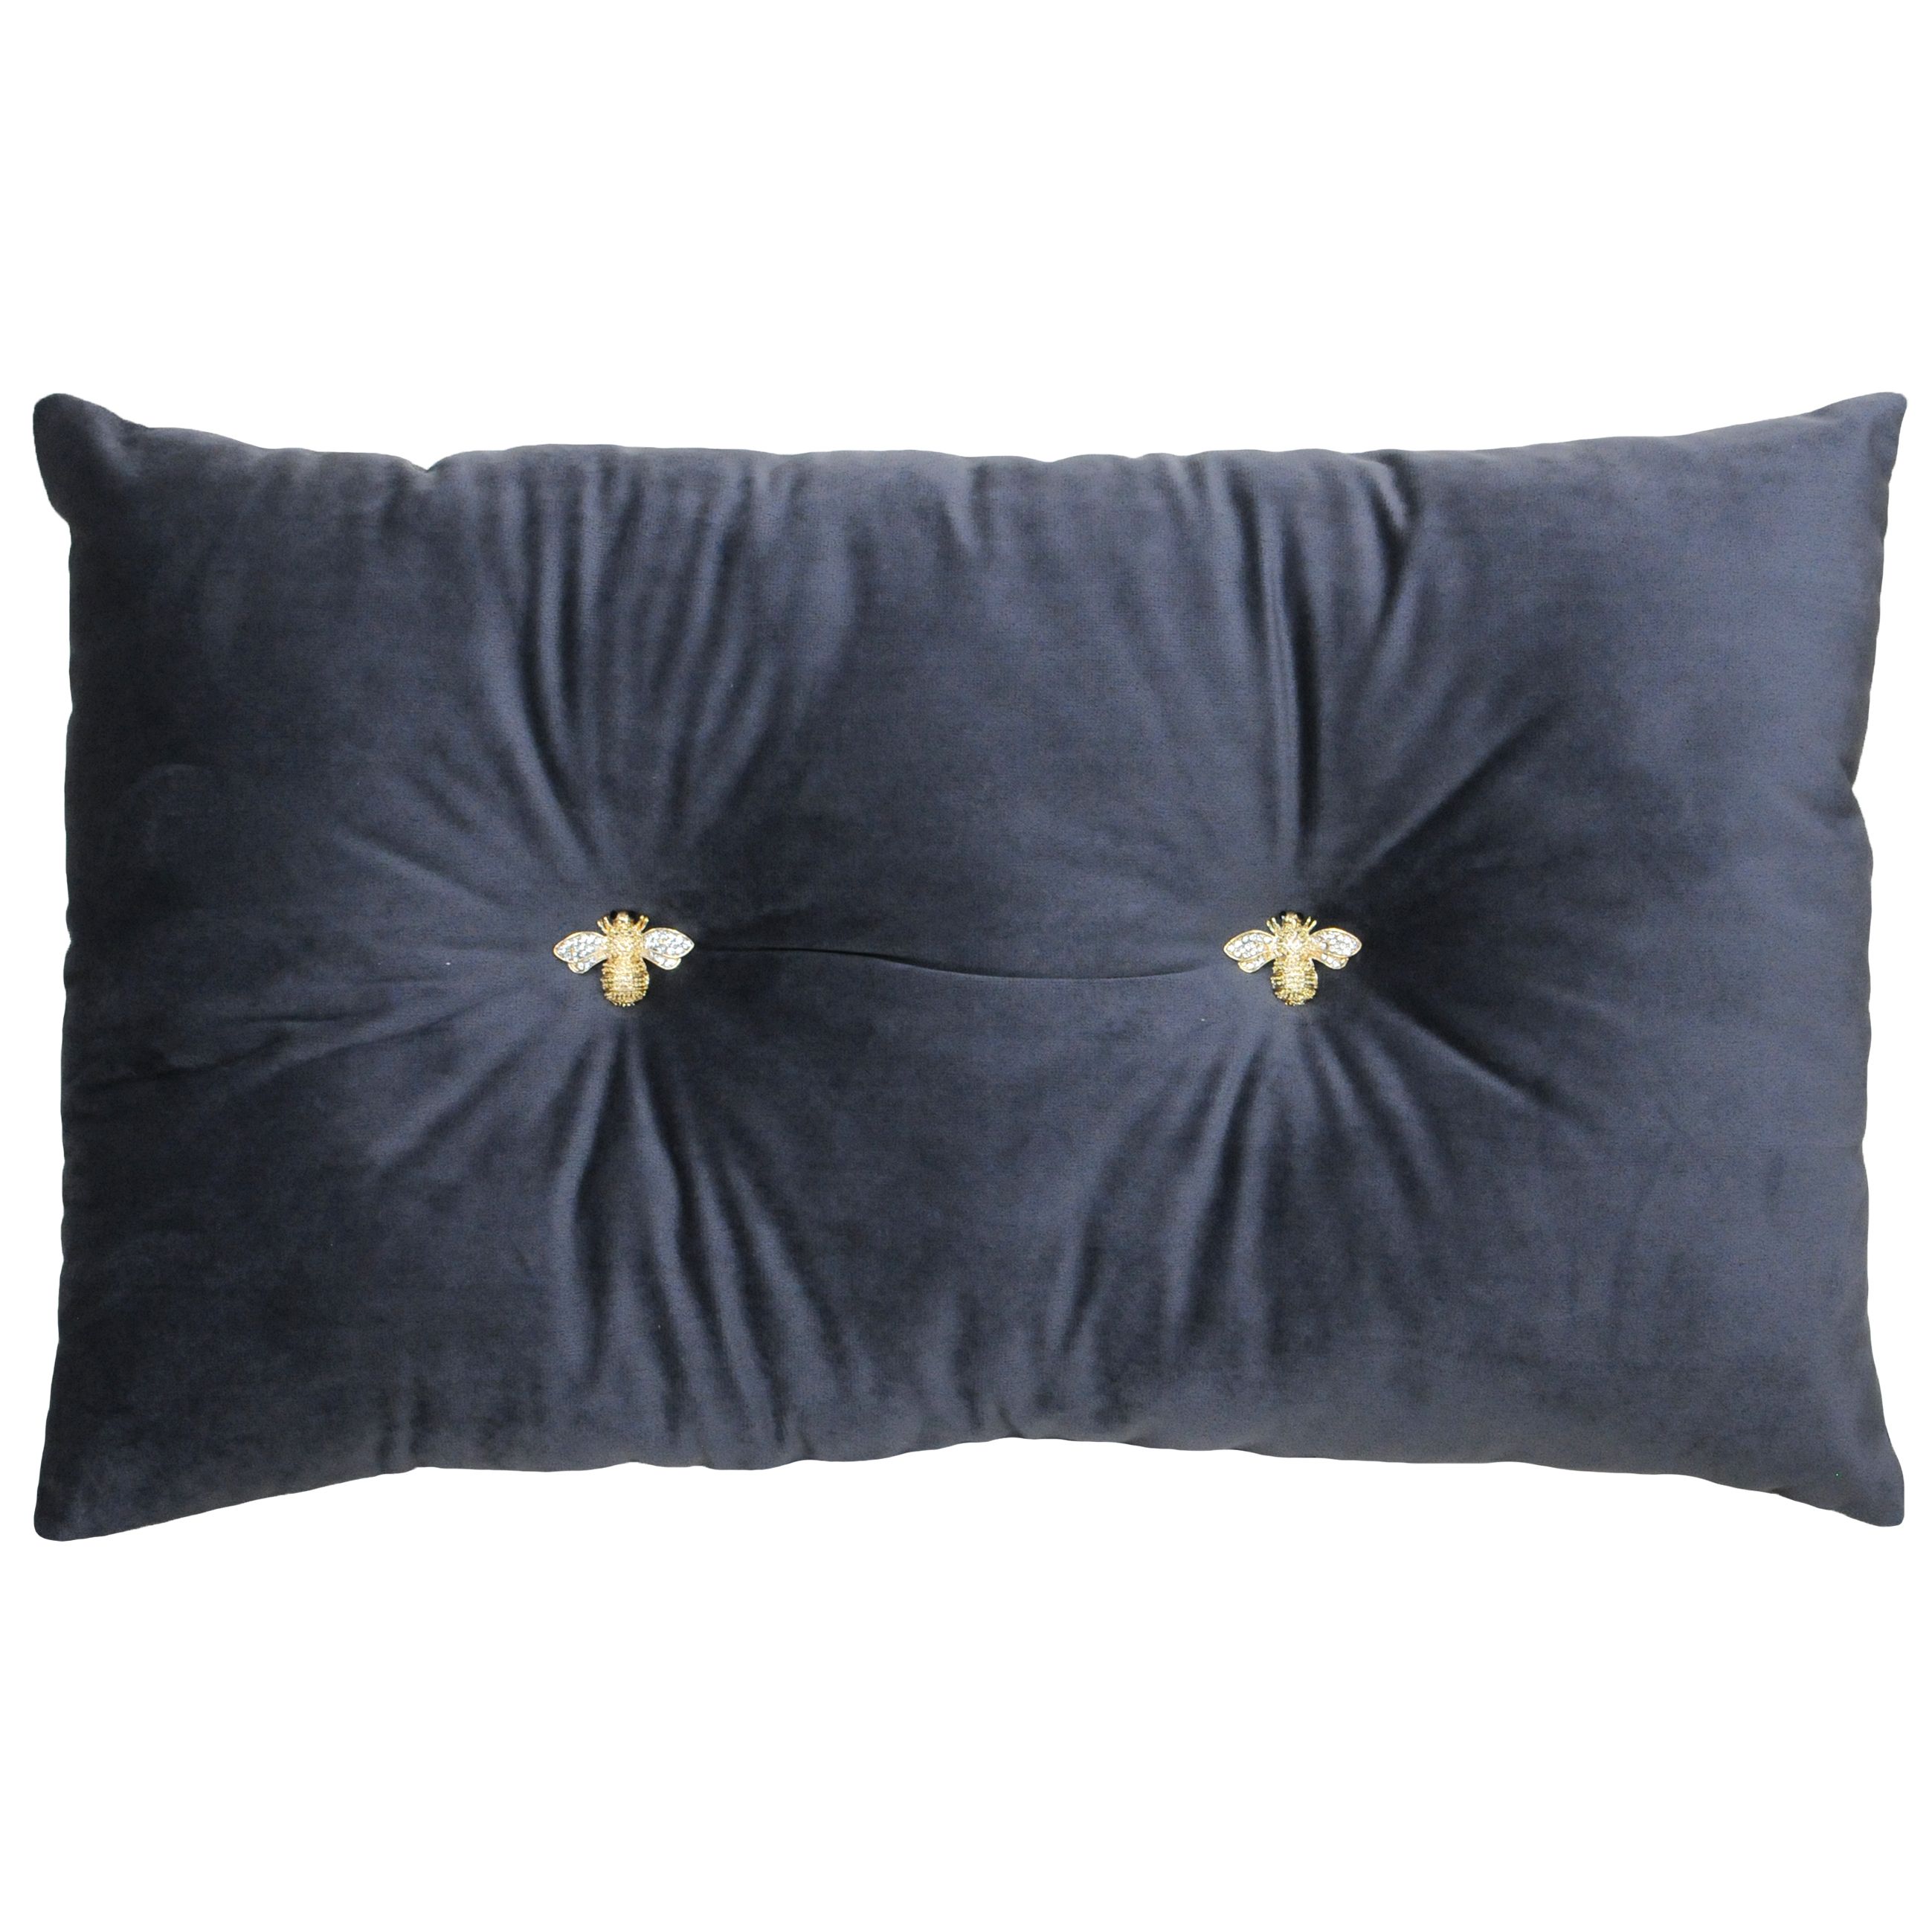 Make your boudoir buzz with colour with the fabulous Paoletti Bumble cushion. Created with super soft, velvet feel fabric this scatter cushion is a welcome addition to any chair, sofa or bed. This unique cushion features two sparkling bumble bee buttons which give this cushion a dash of subtle sparkle and work perfectly with the shimmering velvet material. Each cushion comes pre-filled with hollowfibre polyester to give a plush comfy feel. This delicately unique cushion needs to be treated carefully and can only be spot cleaned. Do not use an iron on this product.